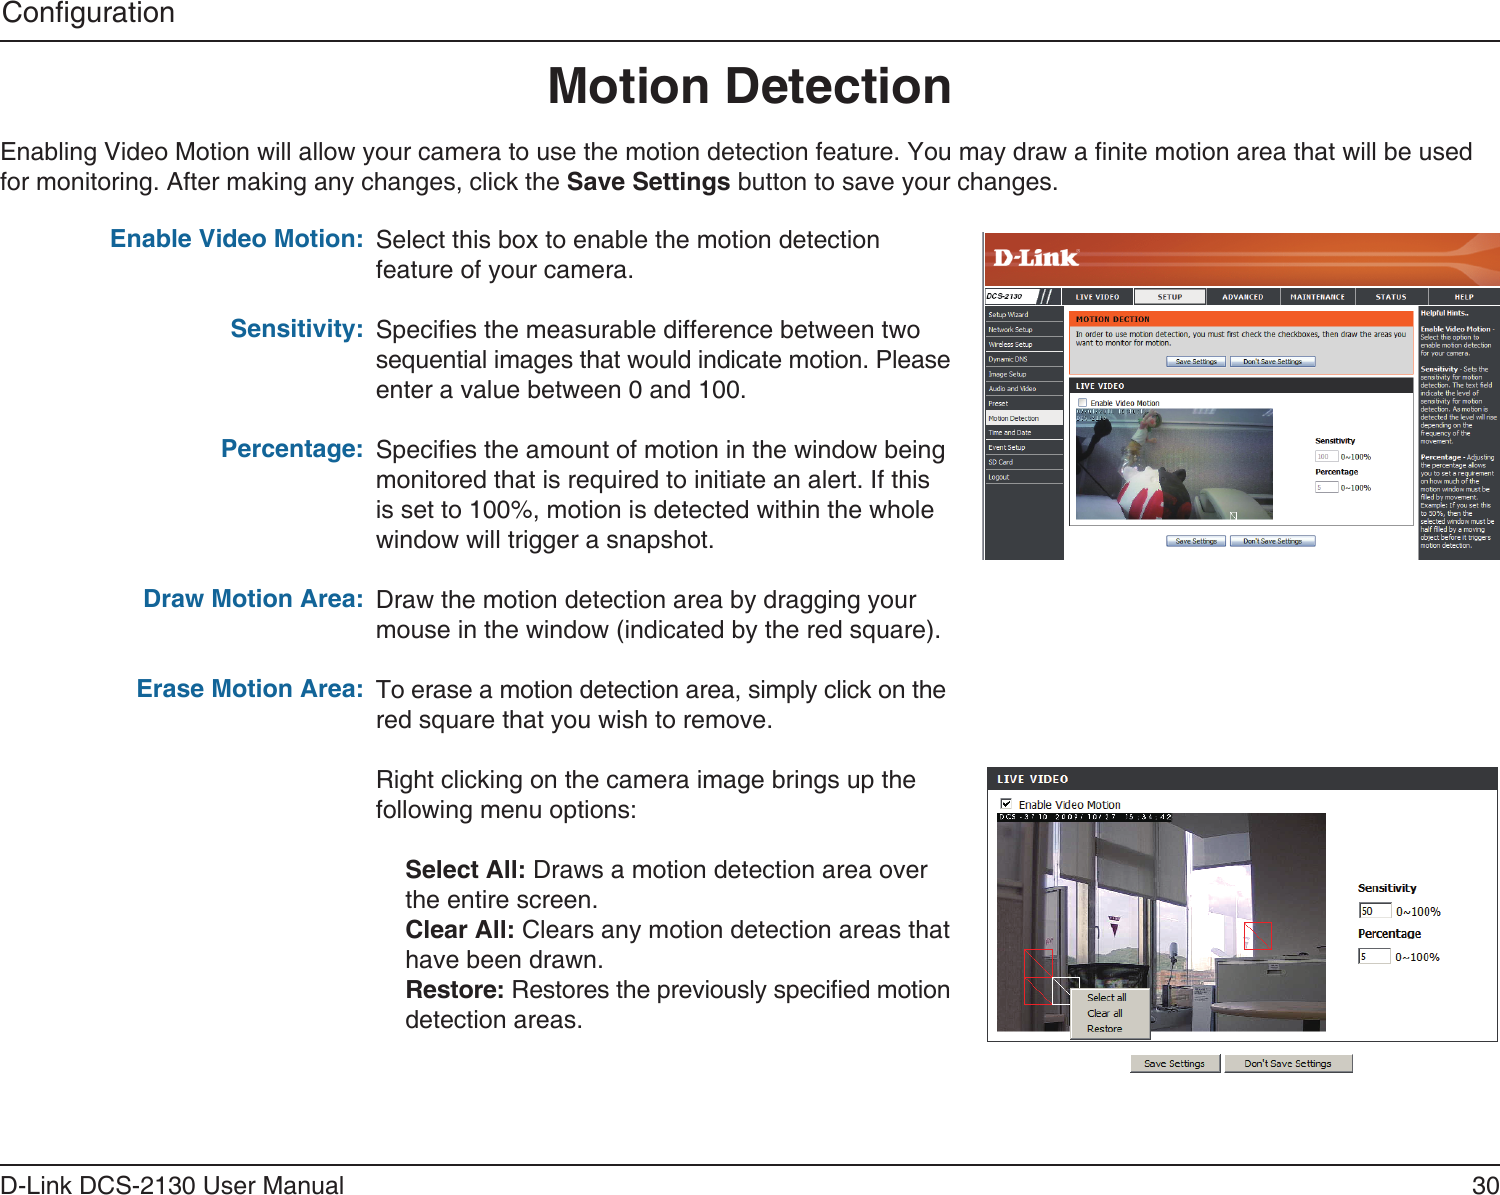 30D-Link DCS-2130 User ManualCongurationMotion DetectionEnabling Video Motion will allow your camera to use the motion detection feature. You may draw a nite motion area that will be used for monitoring. After making any changes, click the Save Settings button to save your changes.Enable Video Motion:Sensitivity:Percentage:Draw Motion Area:Erase Motion Area:Select this box to enable the motion detection feature of your camera.Species the measurable difference between two sequential images that would indicate motion. Please enter a value between 0 and 100.Species the amount of motion in the window being monitored that is required to initiate an alert. If this is set to 100%, motion is detected within the whole window will trigger a snapshot.Draw the motion detection area by dragging your mouse in the window (indicated by the red square).To erase a motion detection area, simply click on the red square that you wish to remove.Right clicking on the camera image brings up the following menu options:Select All: Draws a motion detection area over the entire screen.Clear All: Clears any motion detection areas that have been drawn.Restore: Restores the previously specied motion detection areas.